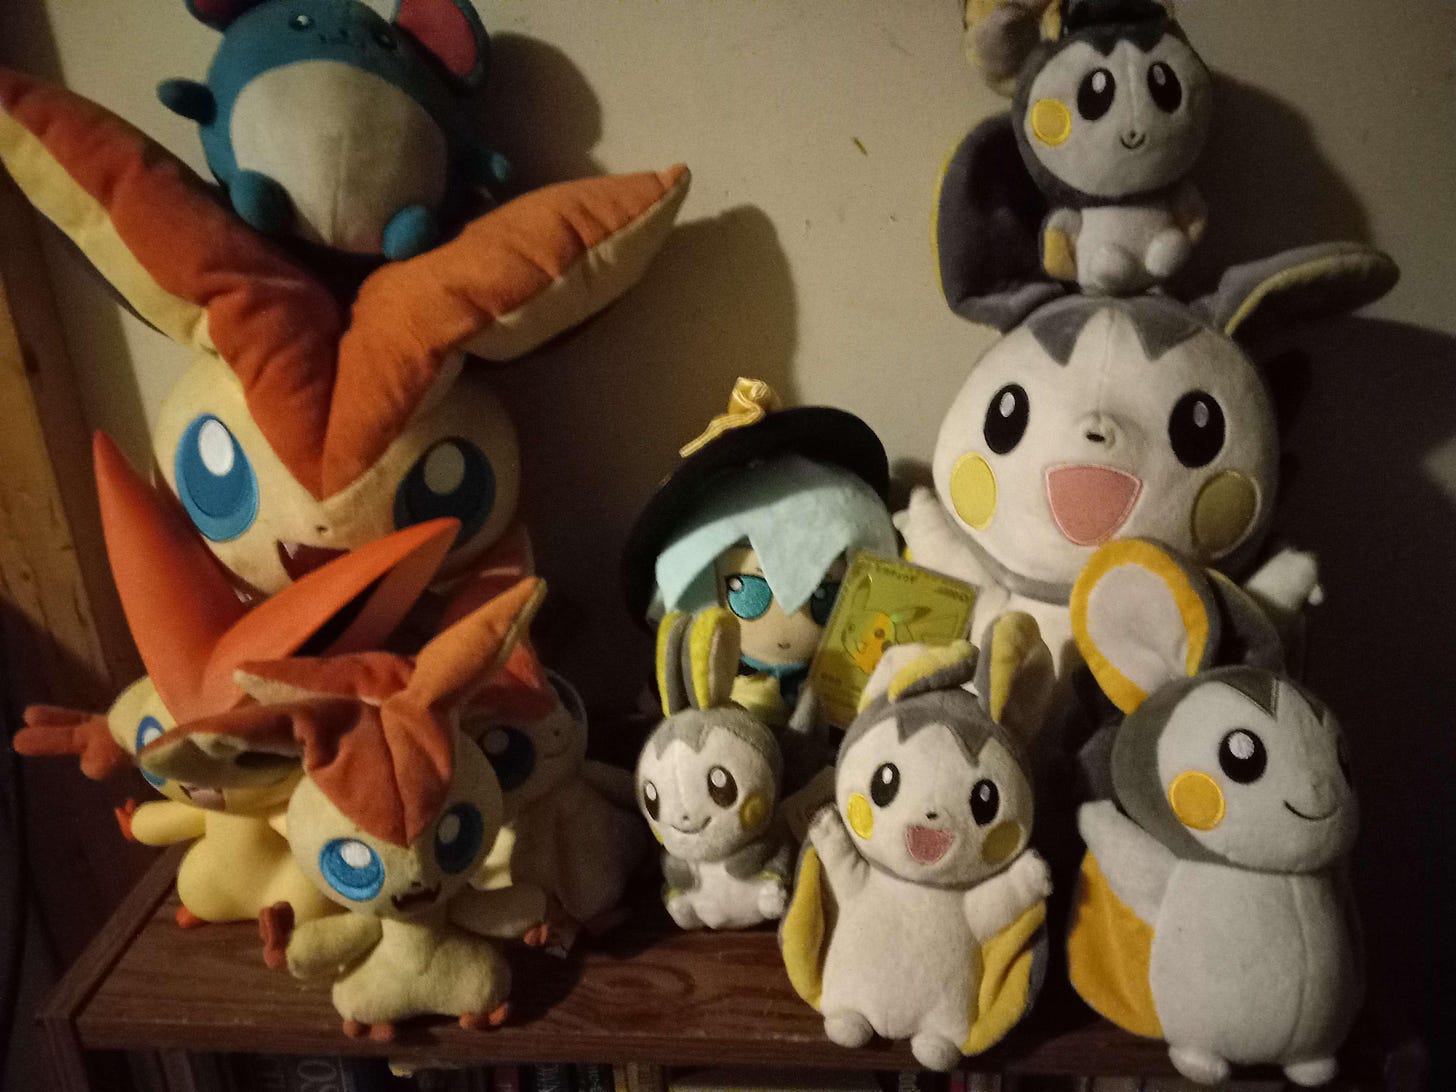 Oshi has a shelf full of Emolga and Victini plush toys (and a Marill) with a special 25th Anniversary Golden Pikachu card!